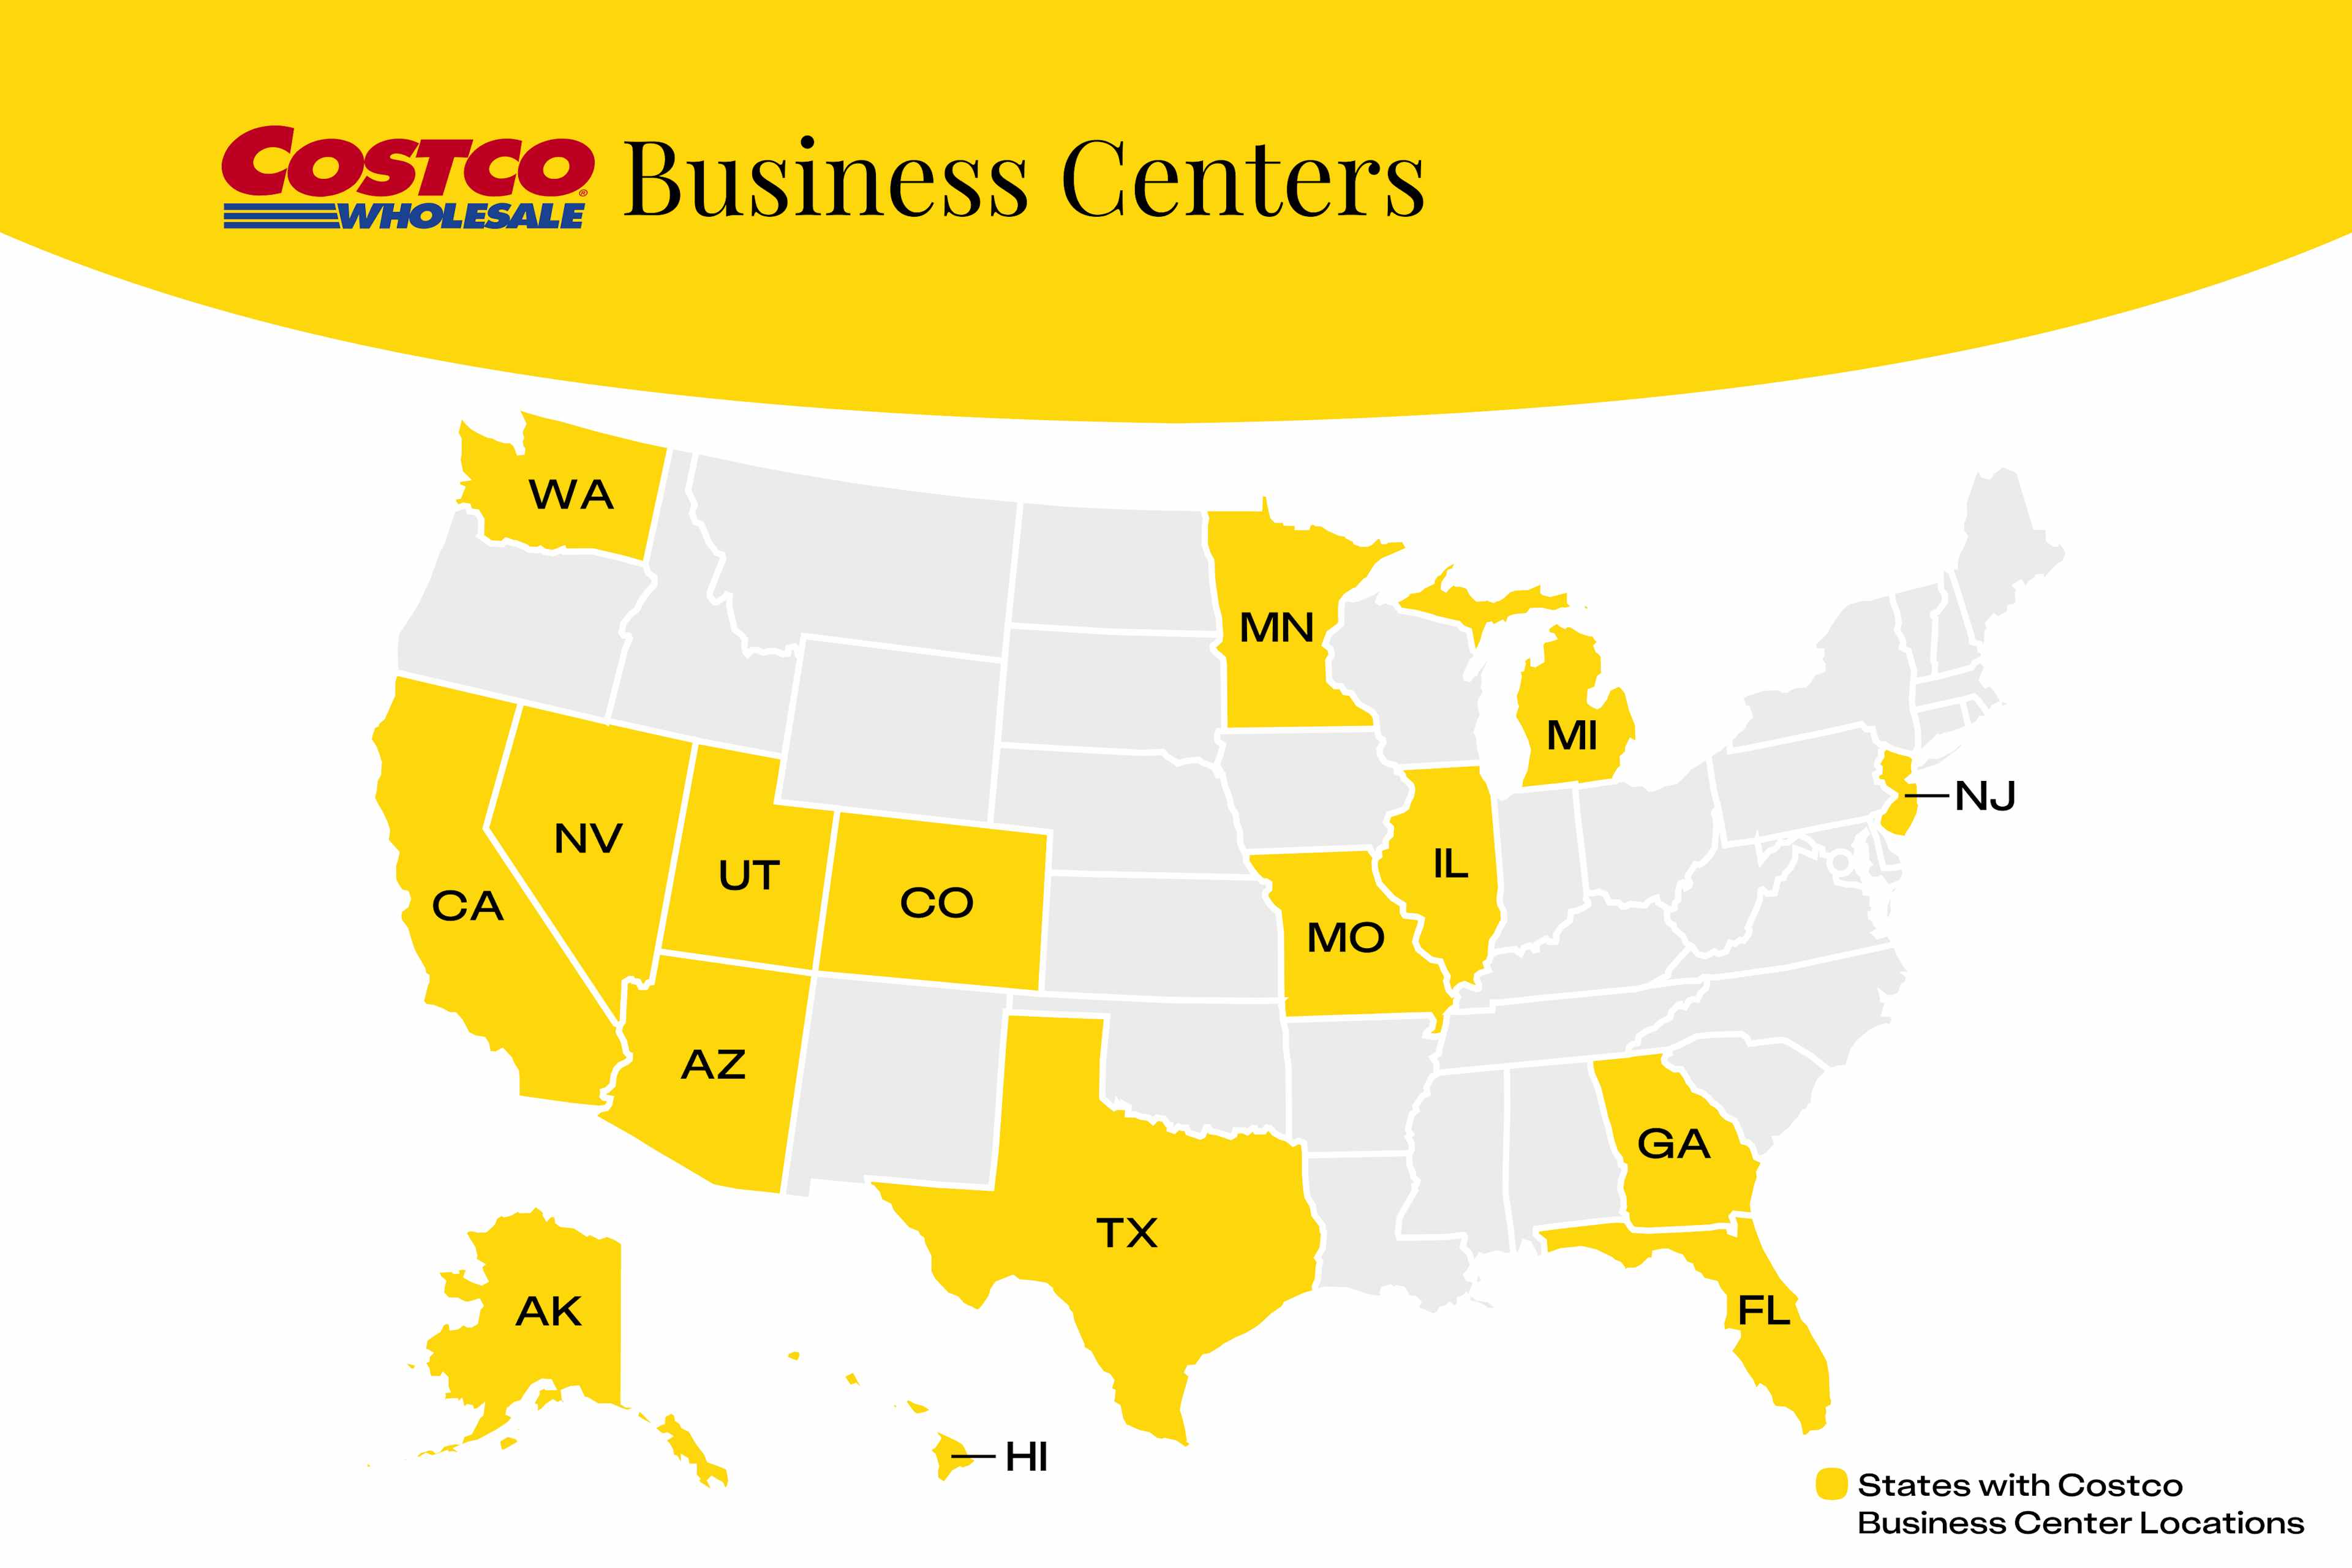 Map of the U.S. showing the 16 states with a Costco Business Center location